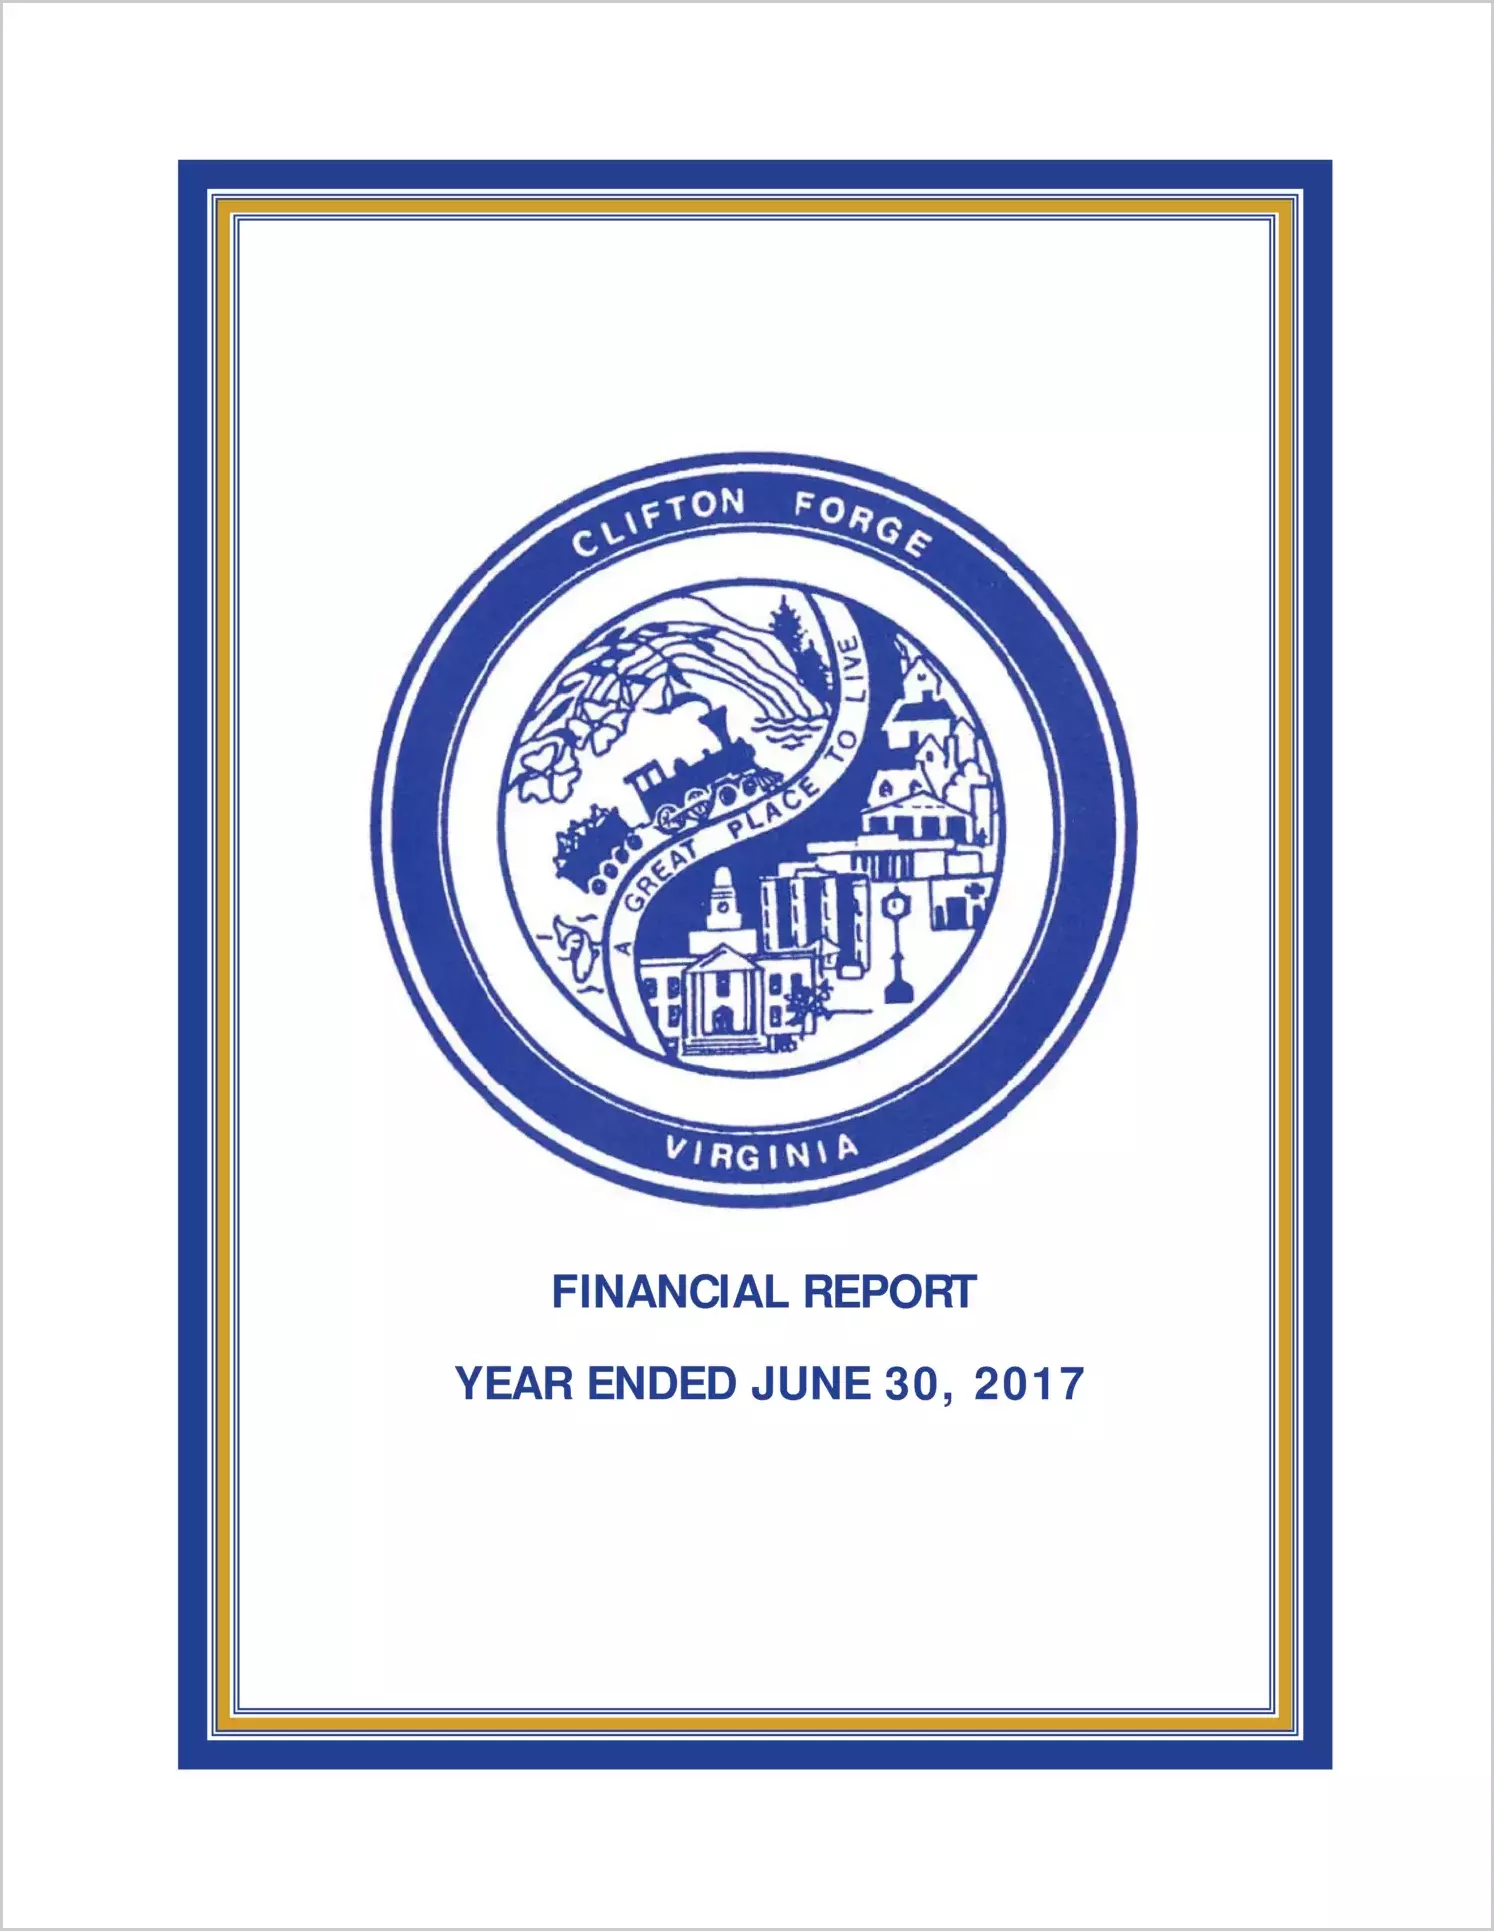 2017 Annual Financial Report for Town of Clifton Forge